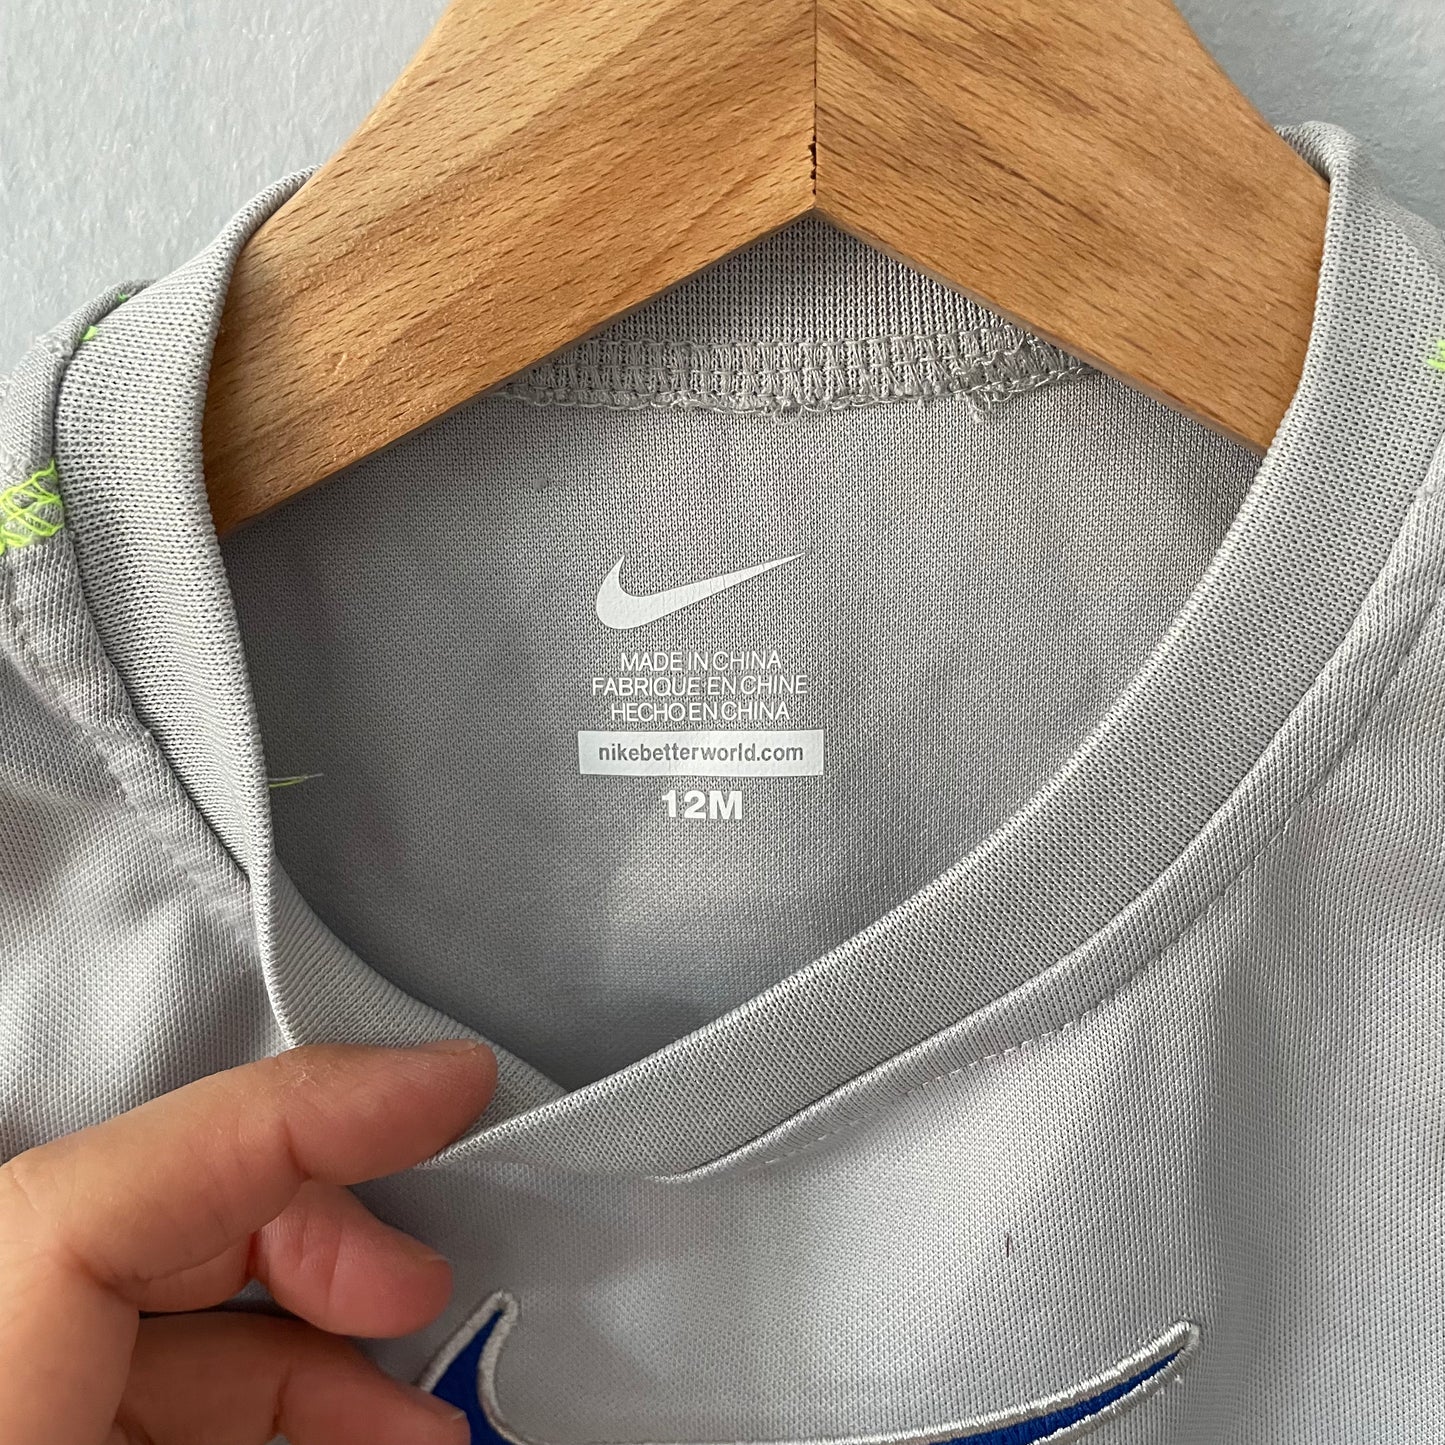 Nike / Active top / 12M